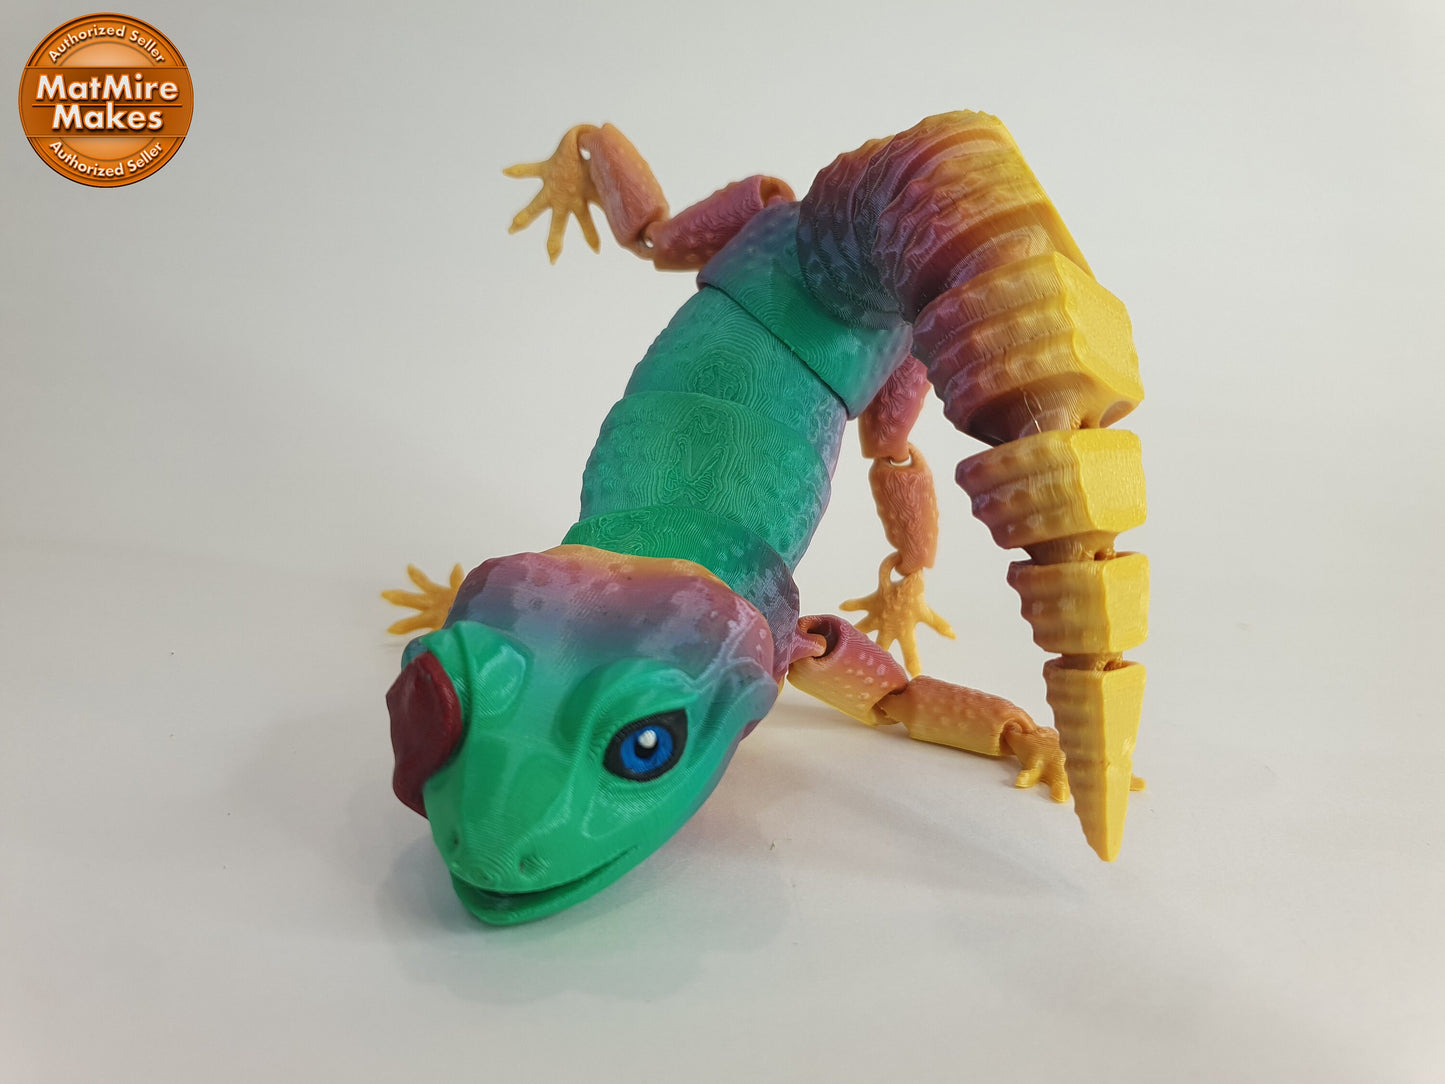 Licky Leo Leopard Gecko - Articulated Flexible 3D Print - Professionally Hand painted finishing details, can be printed any colour you like!